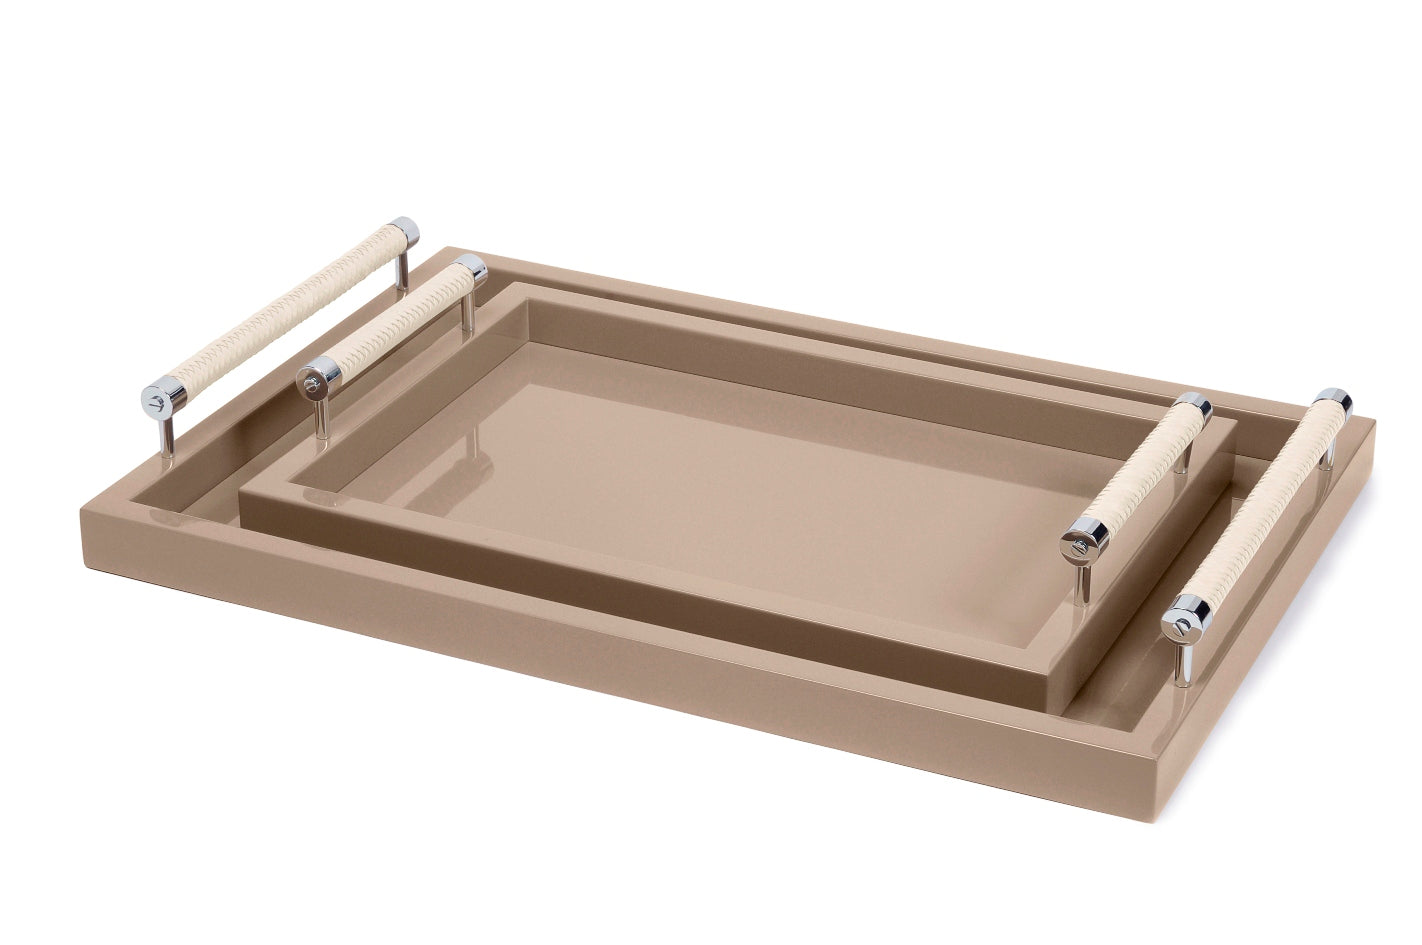 Diana Lacquer Wood Tray with Leather Handles Rectangular Large Chrome